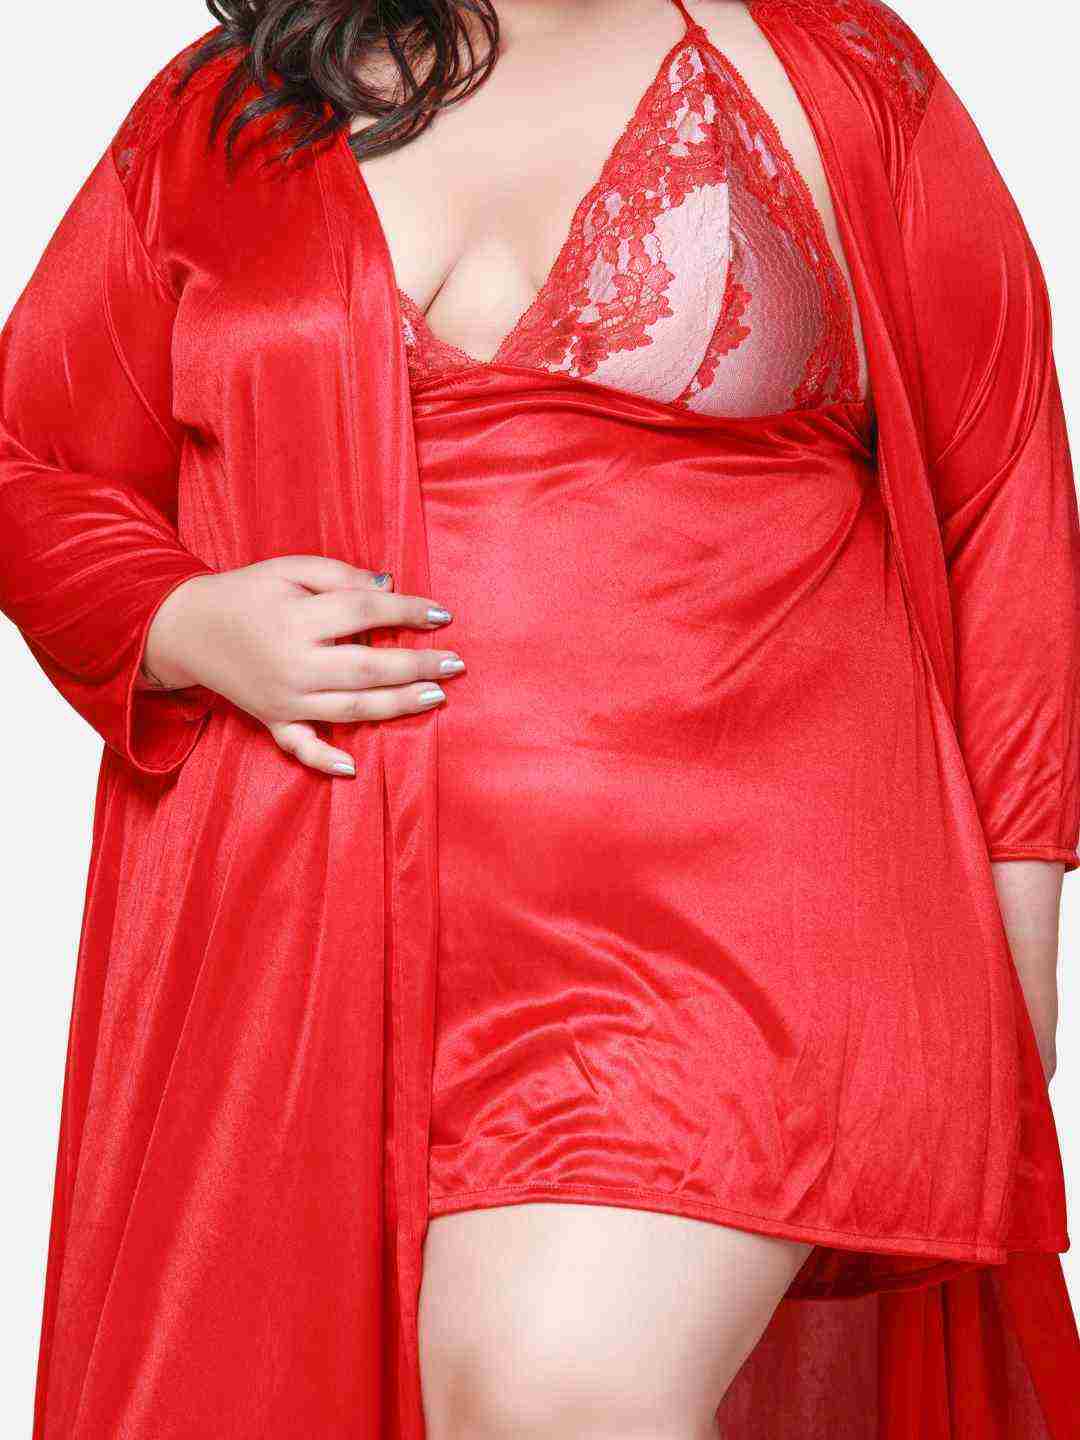 Plus Size Hot Two Piece Maroon Babydoll Night Dress for Women 301Mg